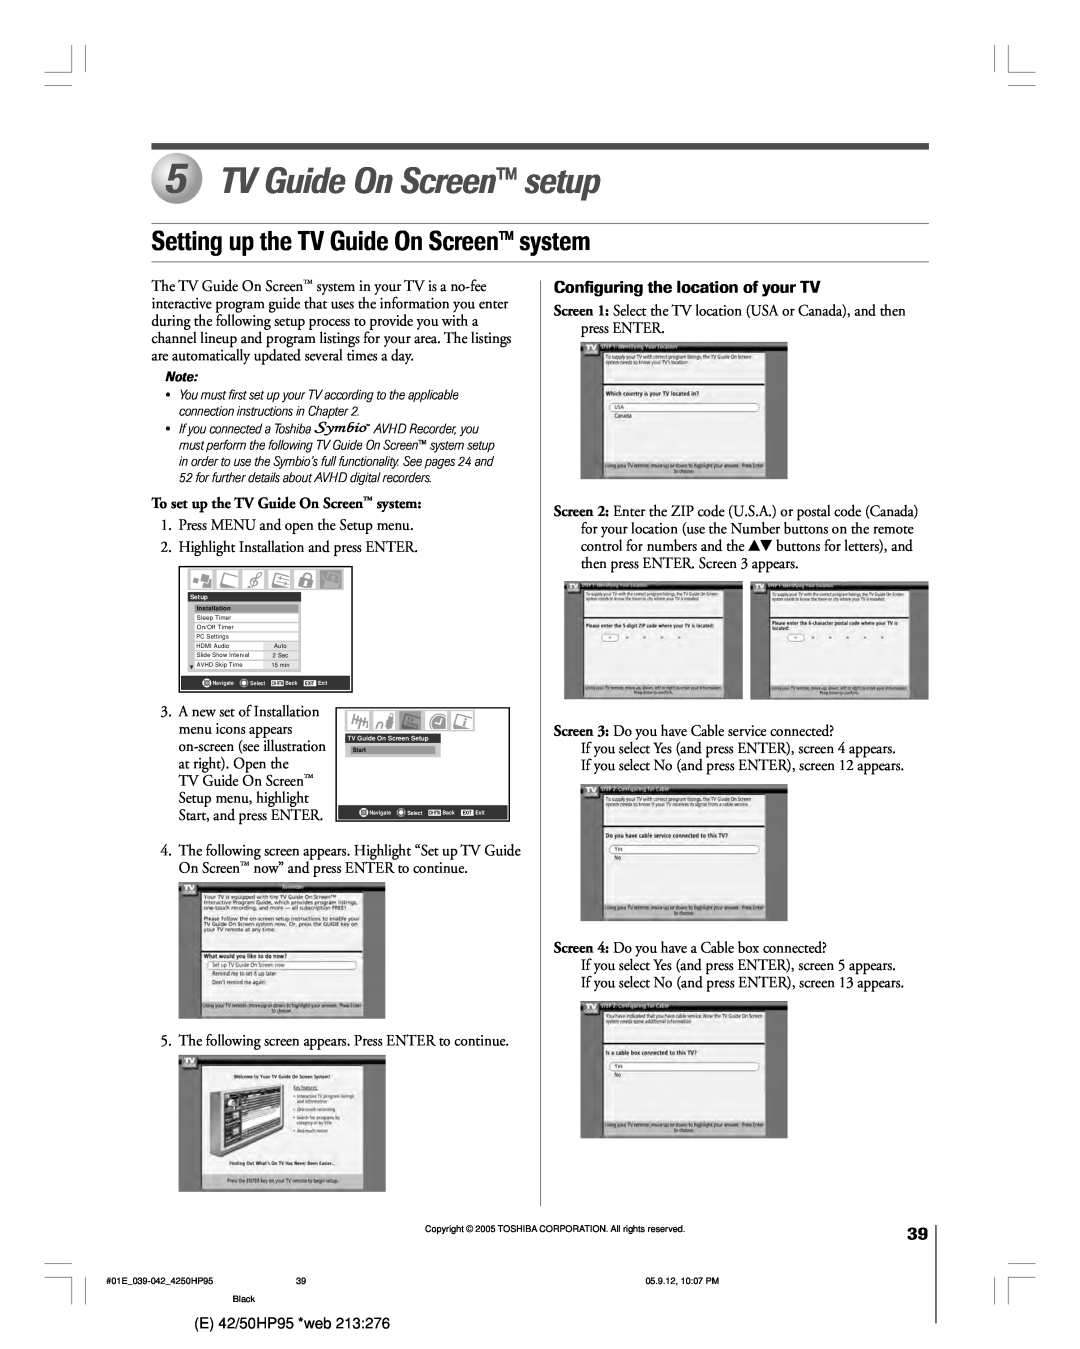 Toshiba 42HP95 TV Guide On Screen setup, Setting up the TV Guide On Screen system, Configuring the location of your TV 